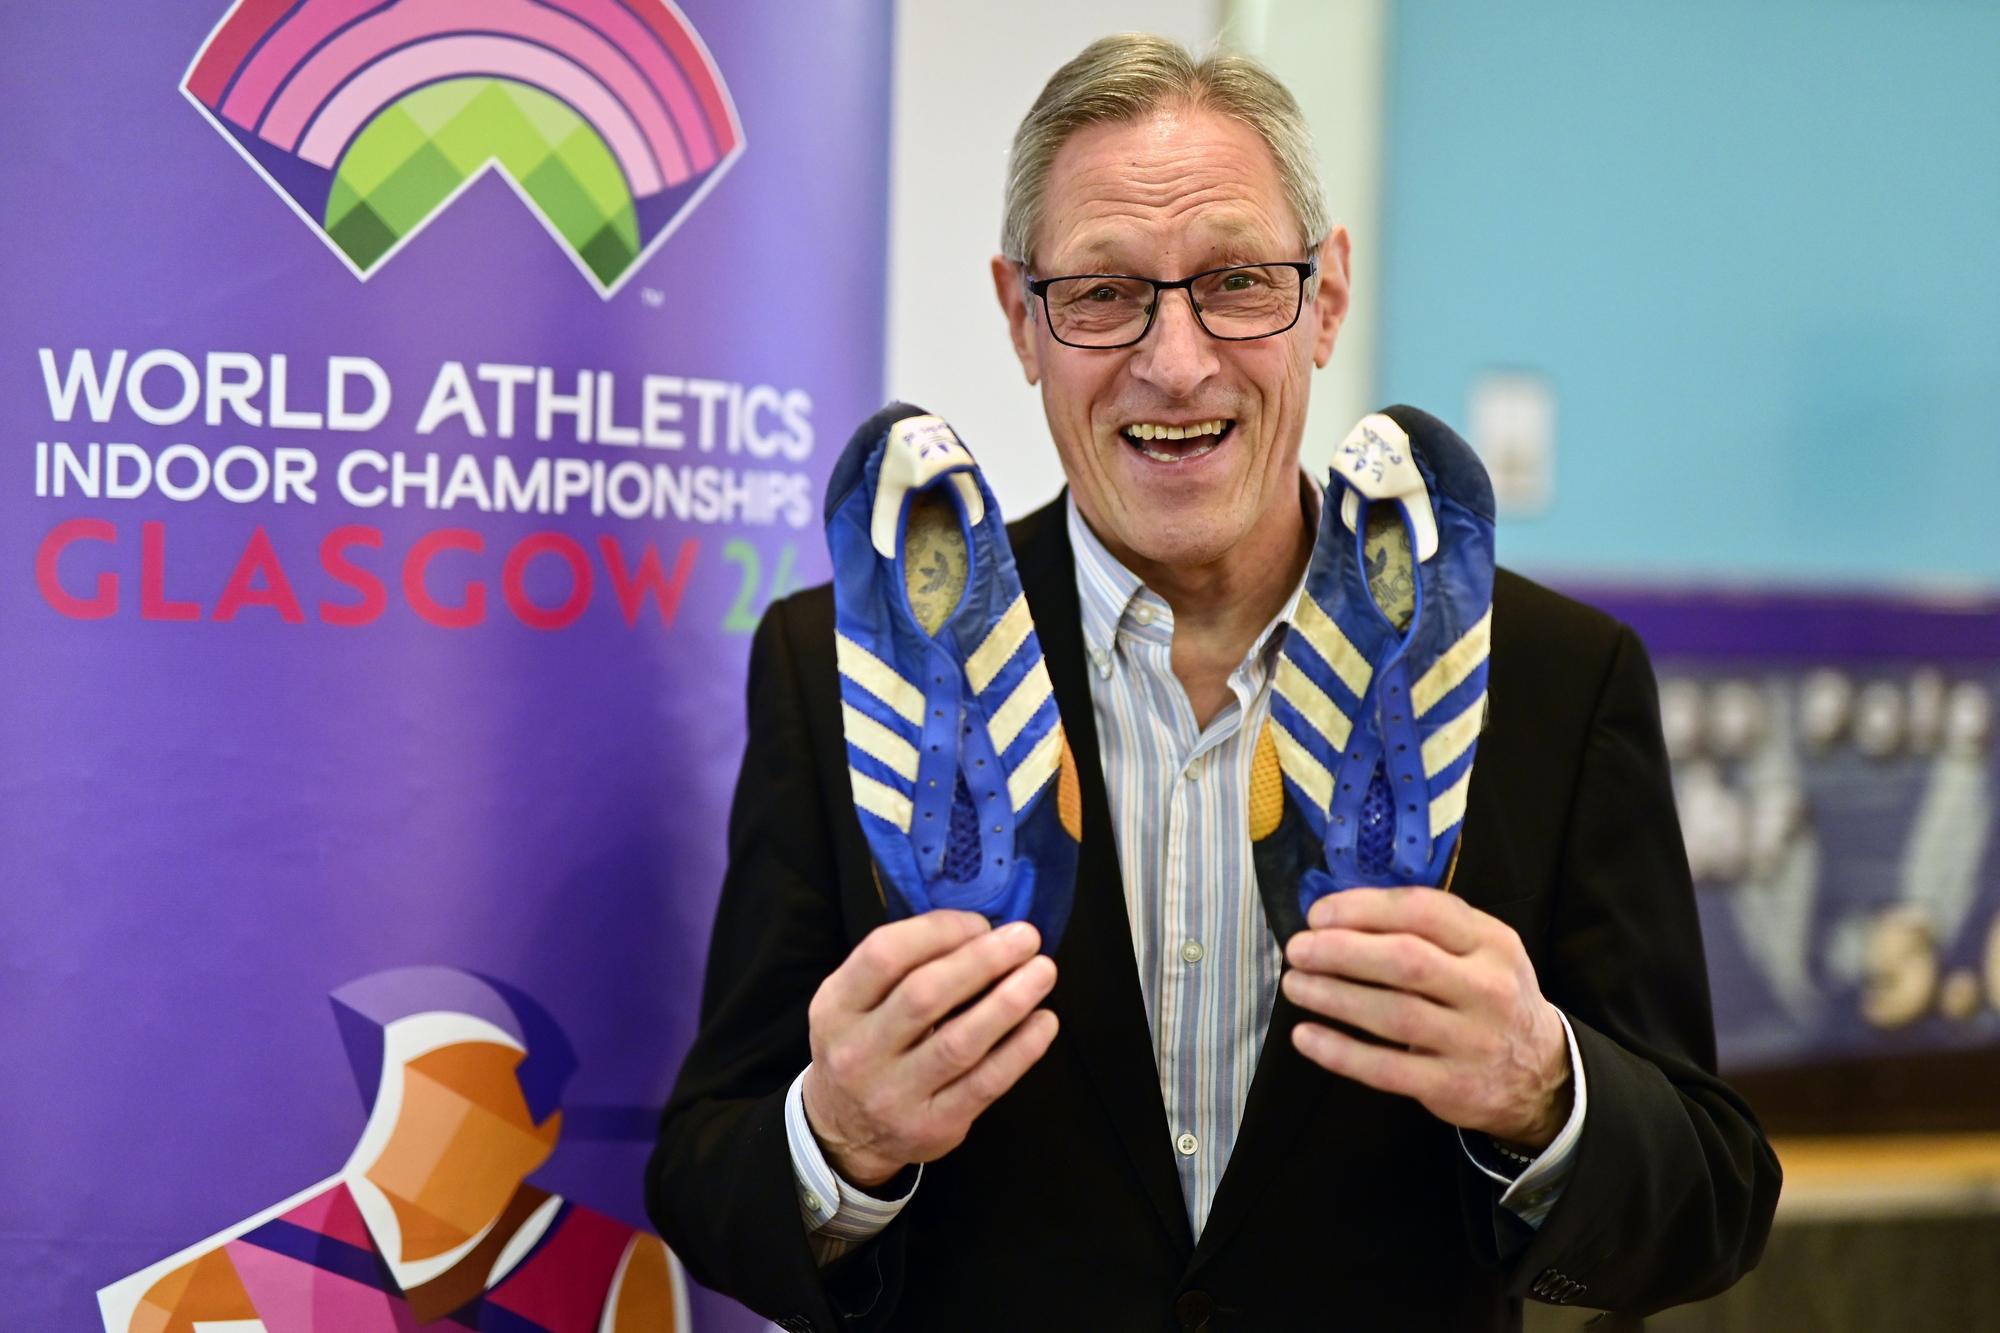 world athletics indoor championships: sporting heroes eilidh doyle and allan wells on hand to unveil medals and open museum of world athletics exhibition